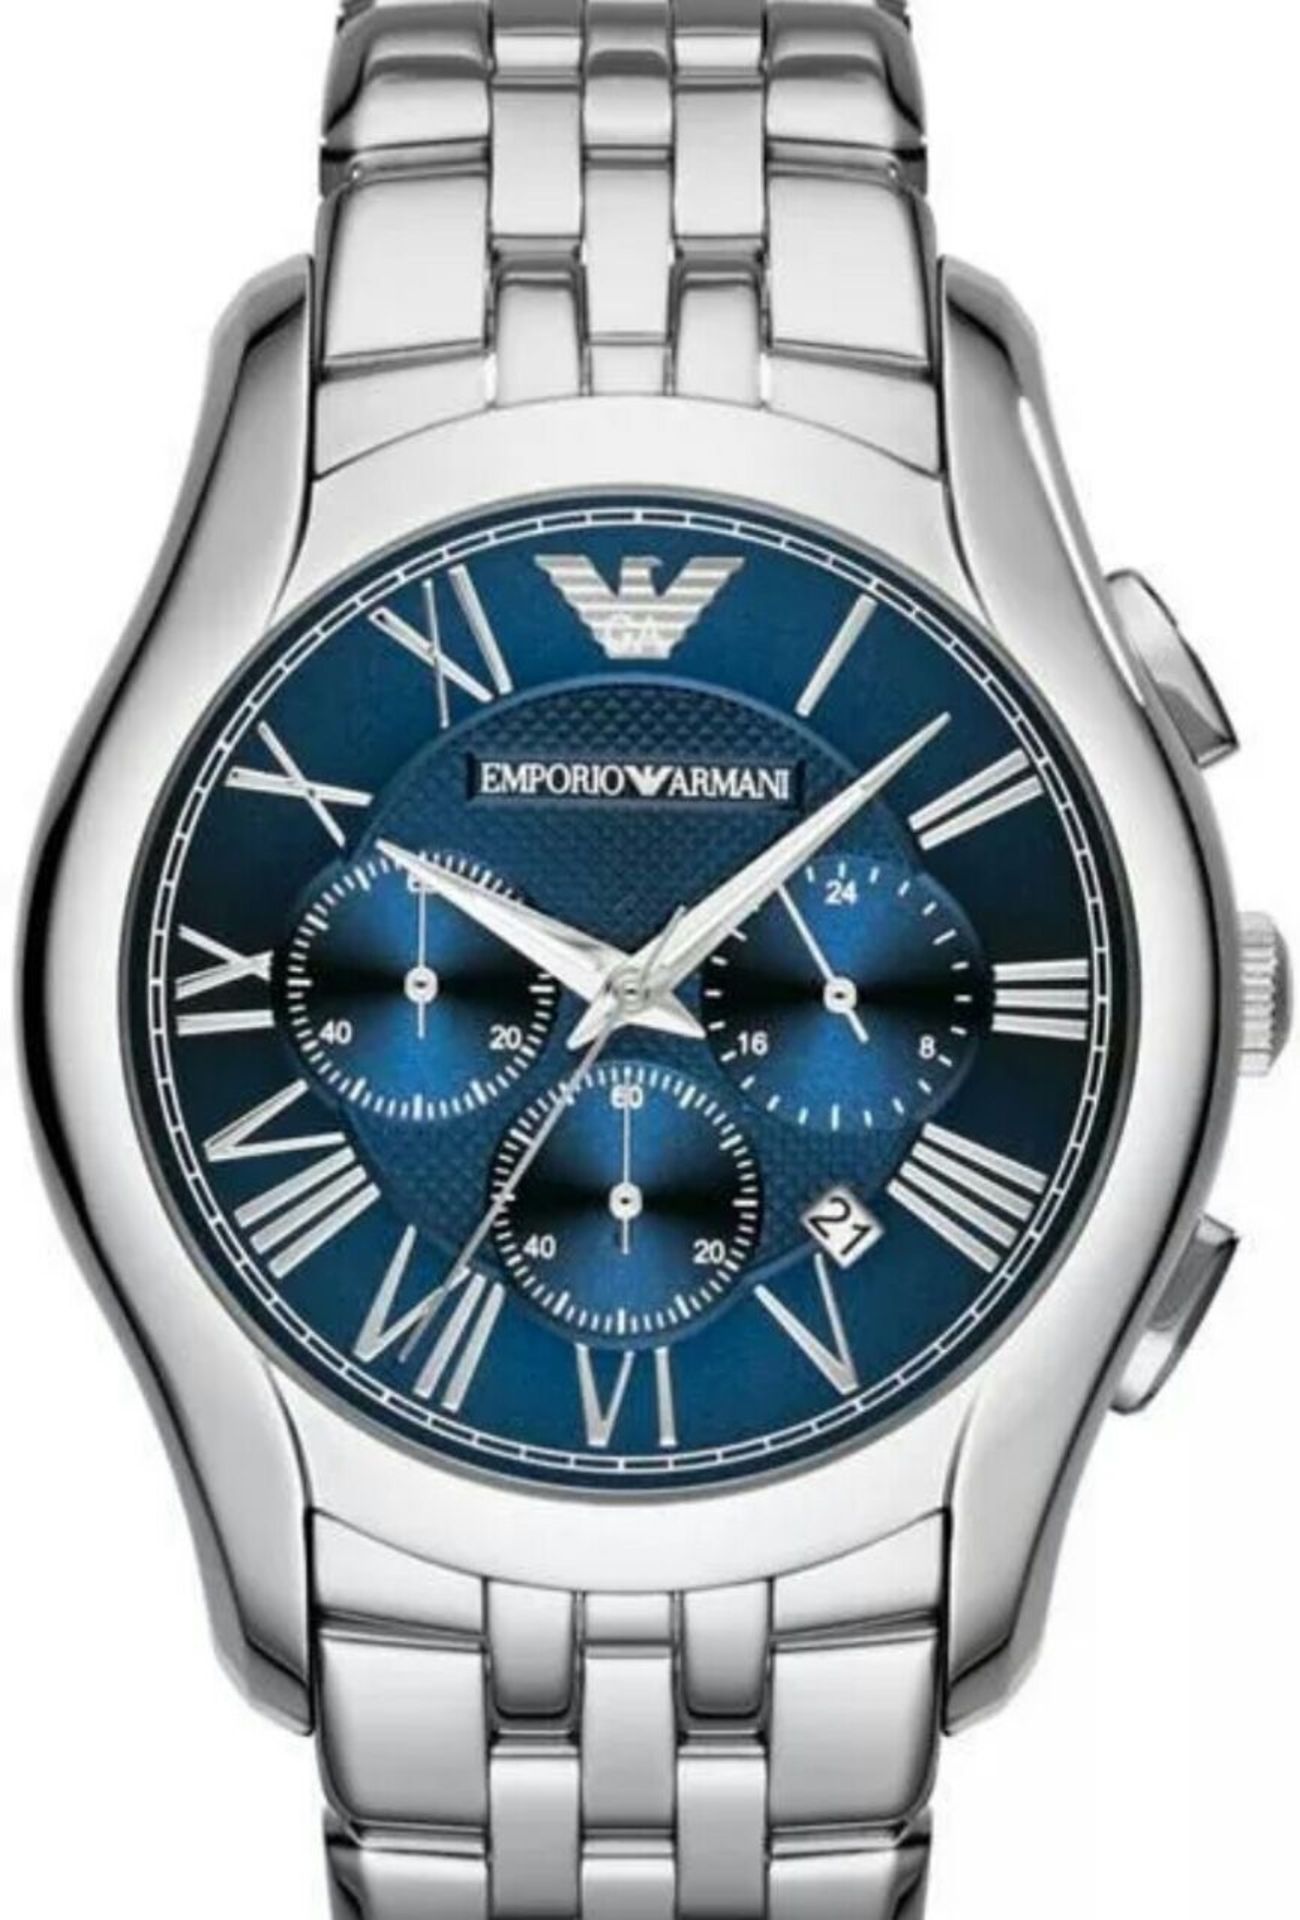 BRAND NEW EMPORIO ARMANI AR1787, GENTS POLISHED STAINLESS STEEL BRACELET WATCH, WITH A BLUE CIRCULAR